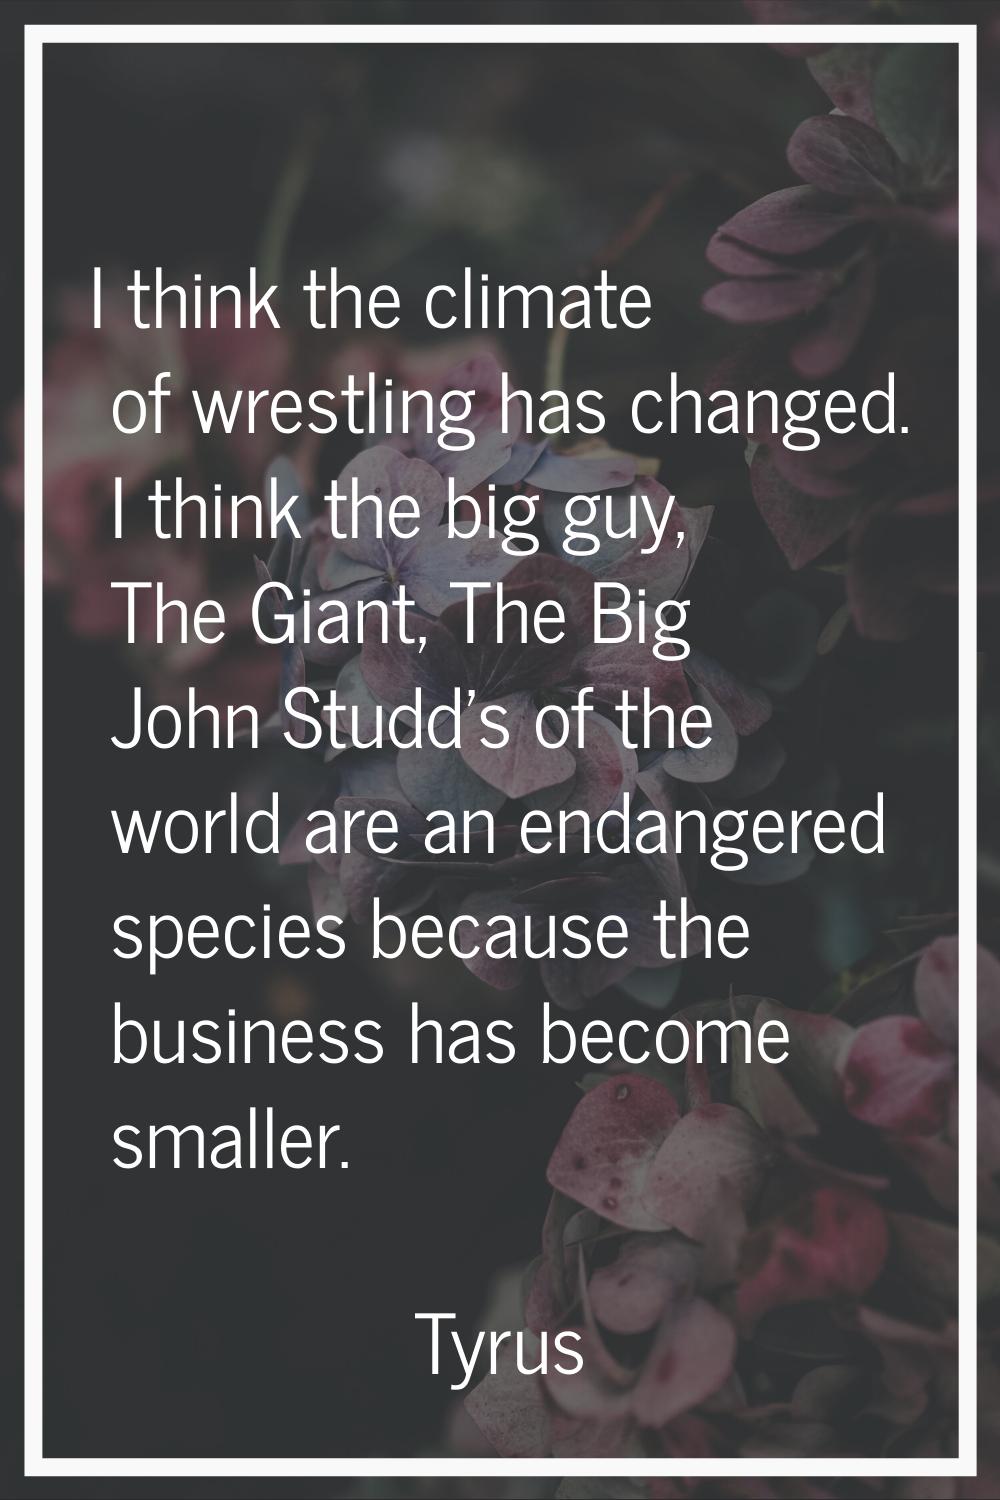 I think the climate of wrestling has changed. I think the big guy, The Giant, The Big John Studd's 